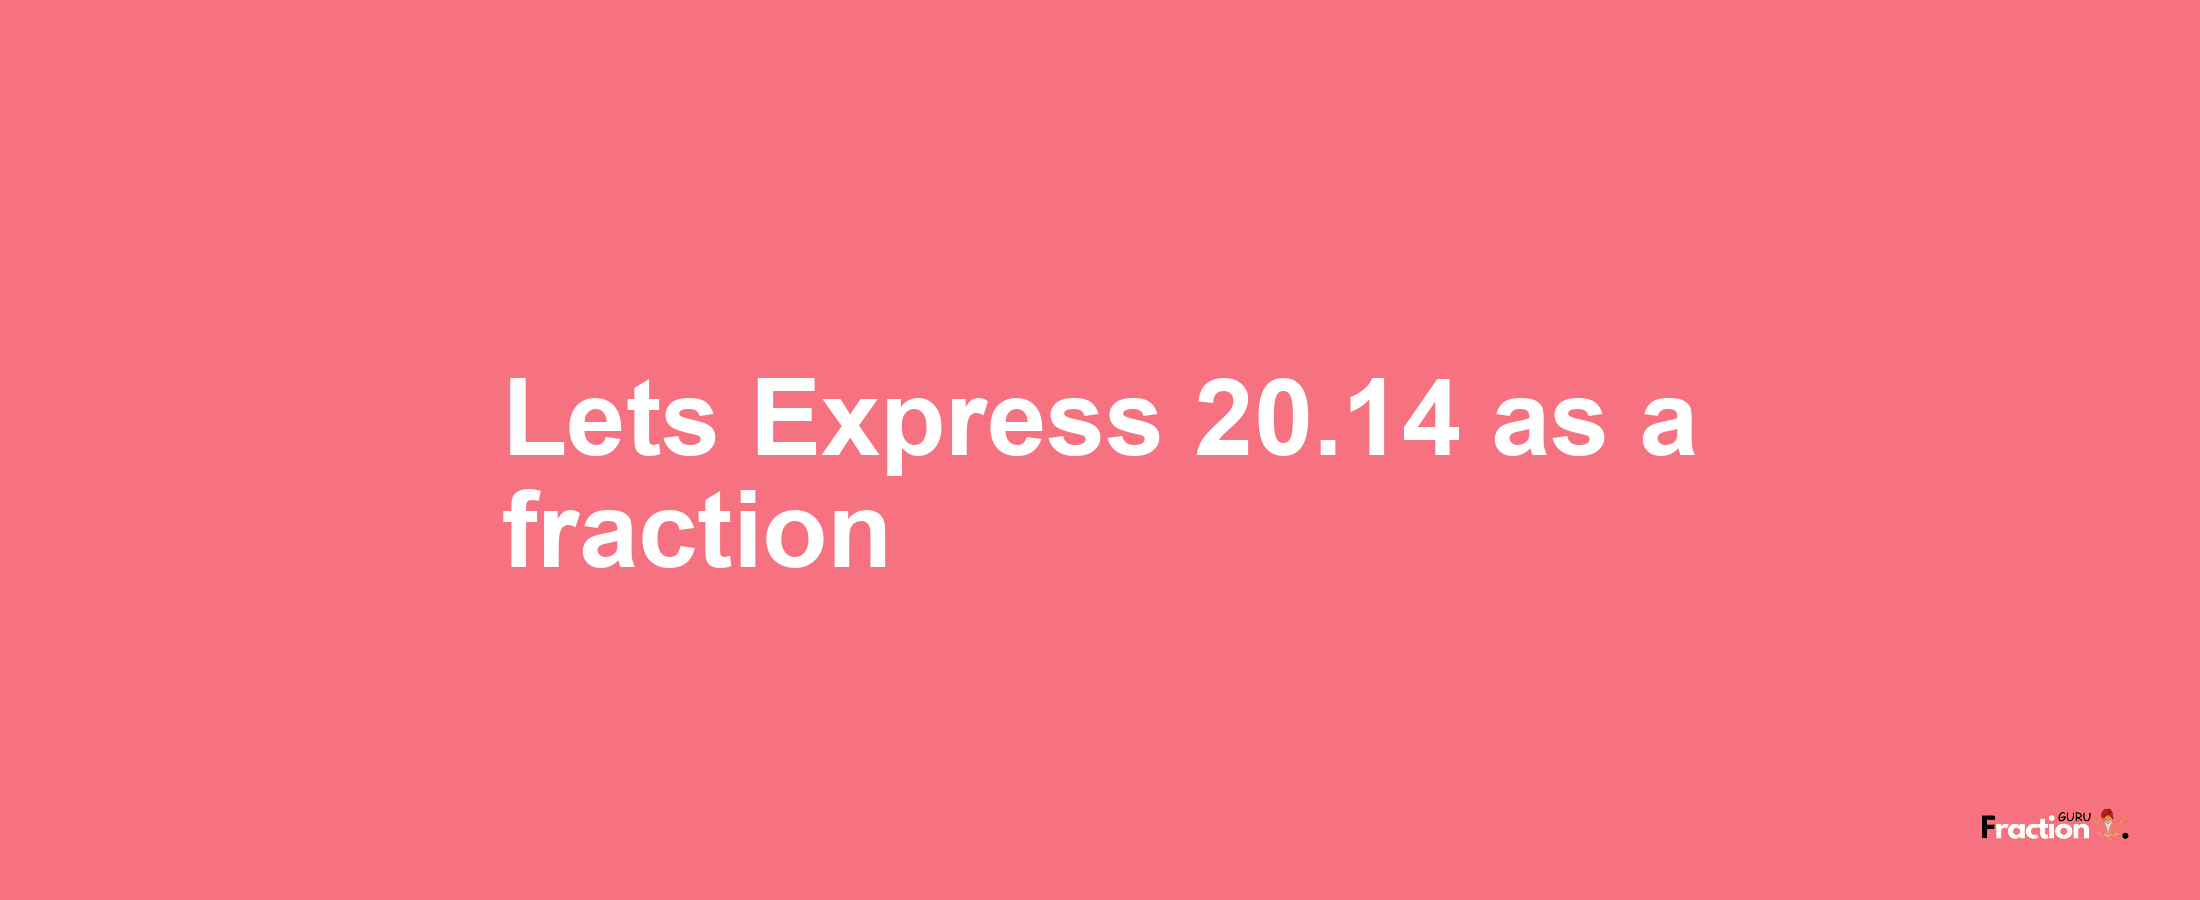 Lets Express 20.14 as afraction